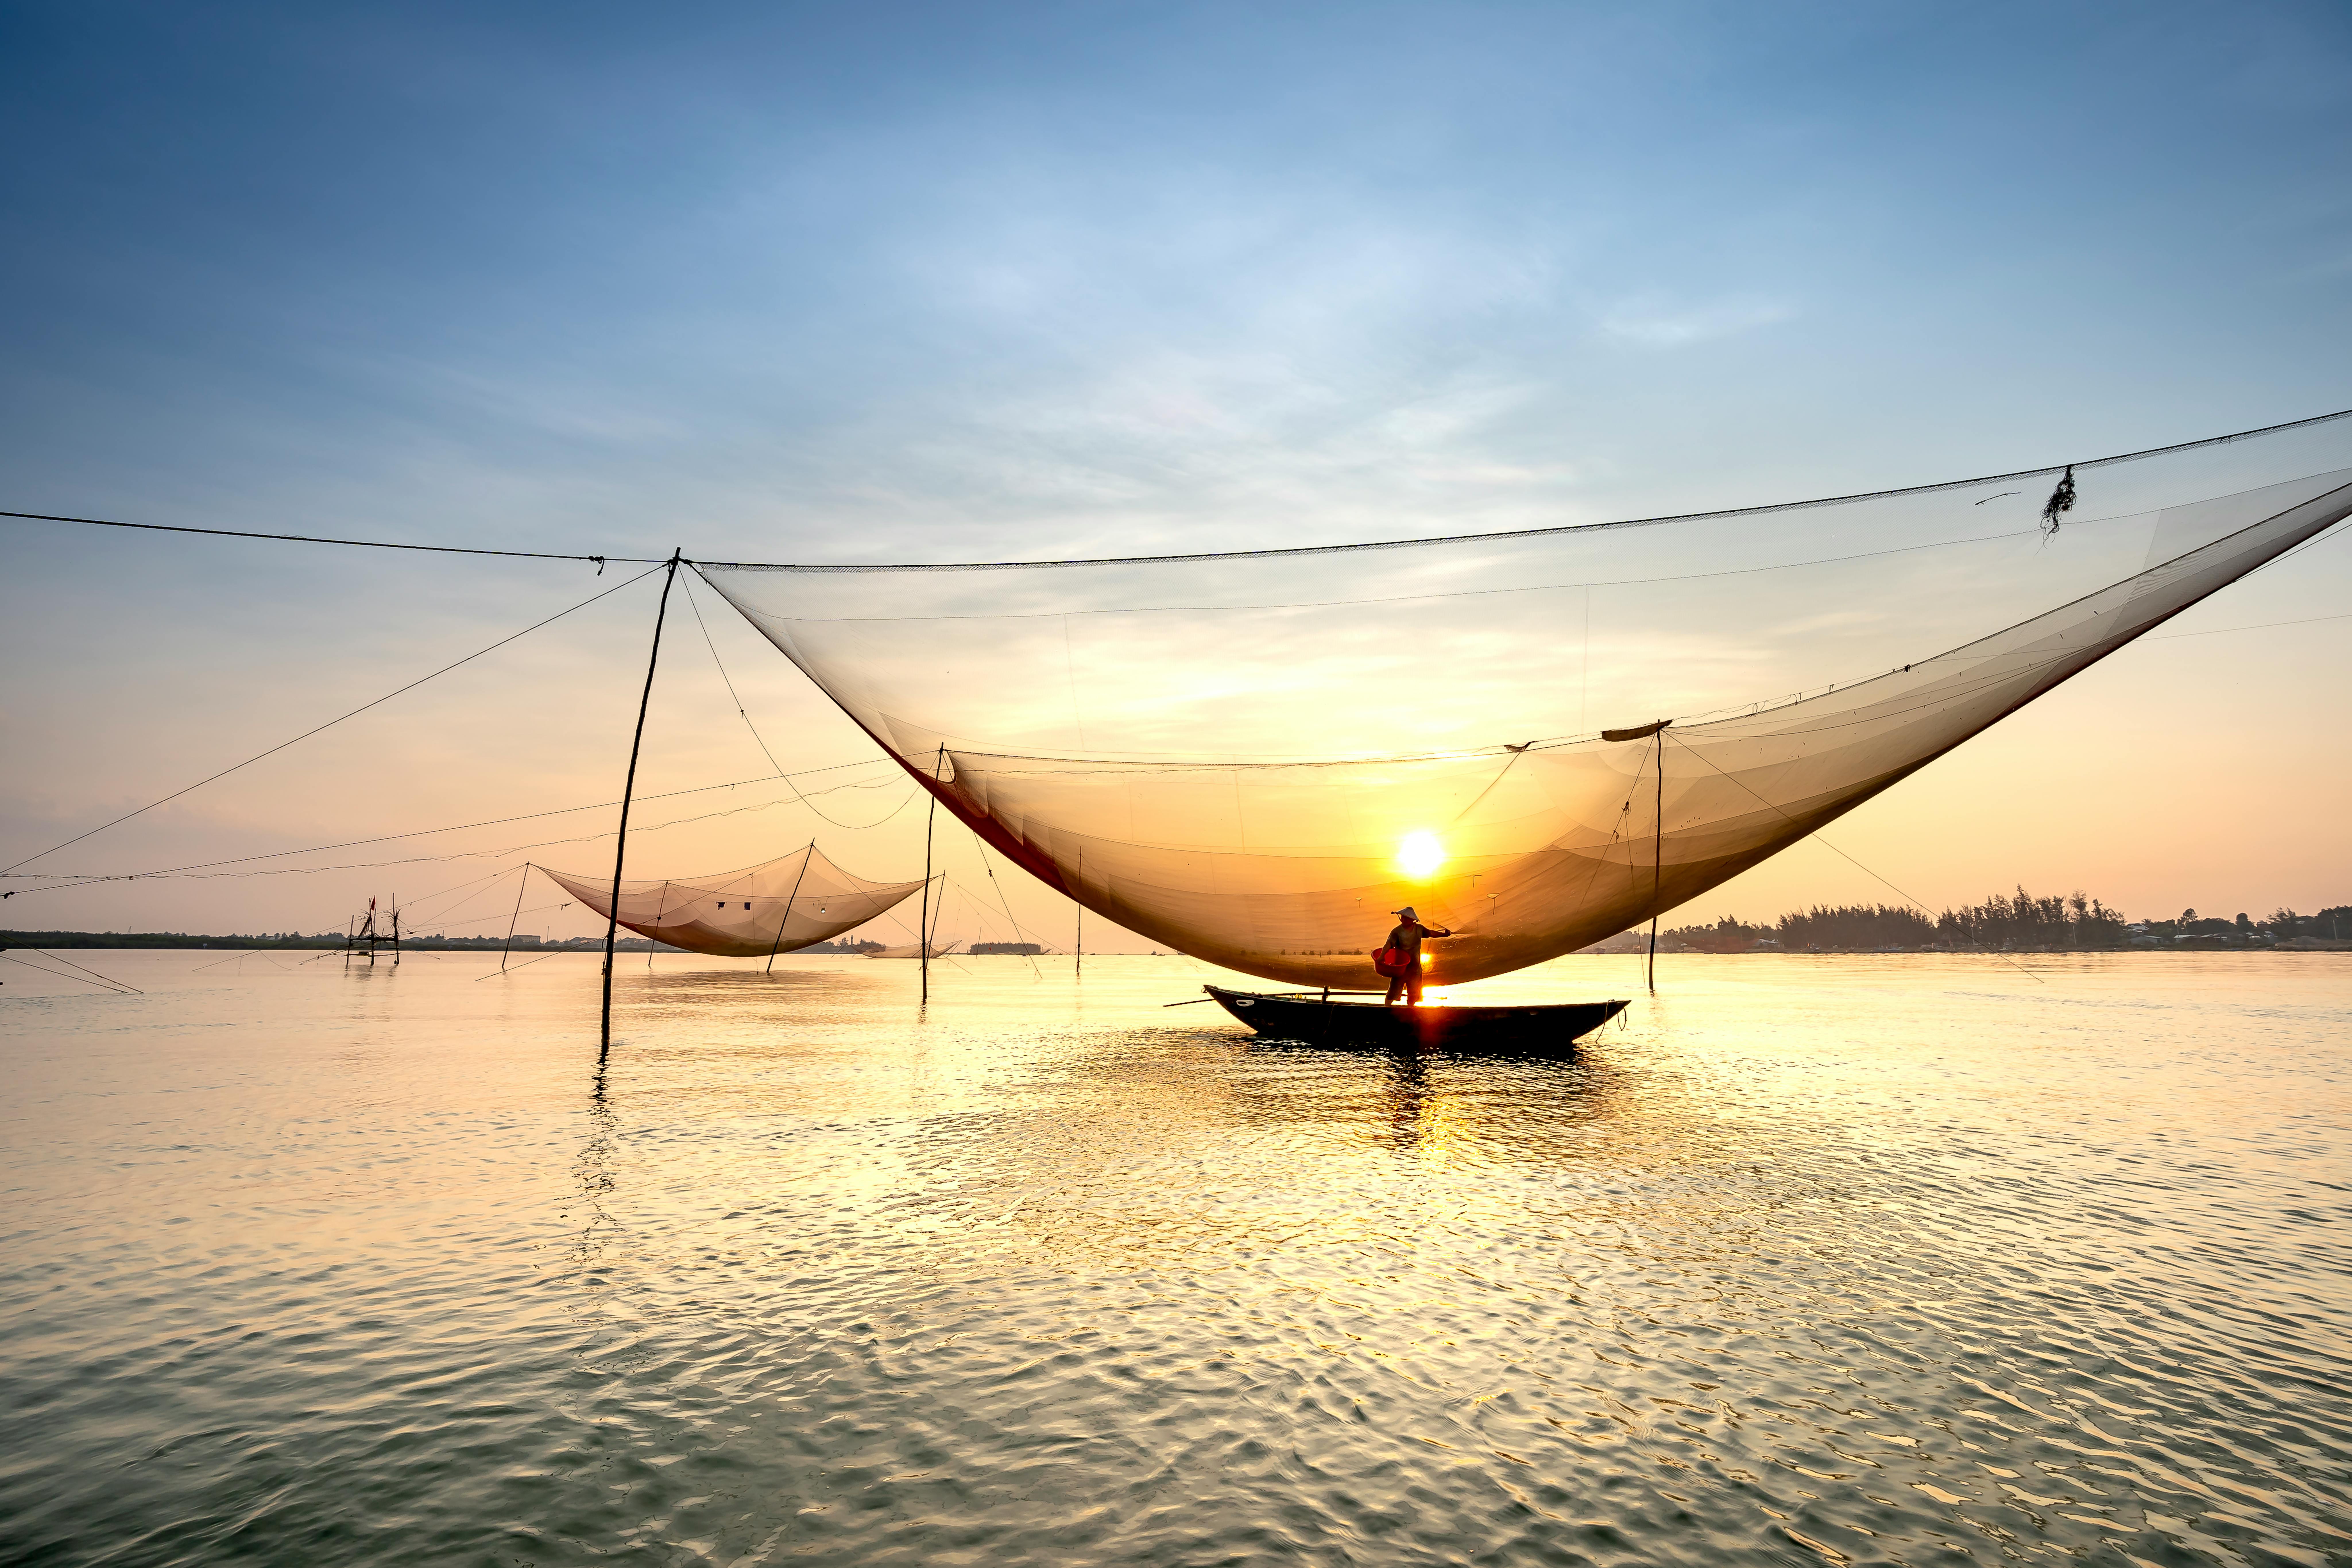 Silhouette of fisherman in boat catching fish with large net